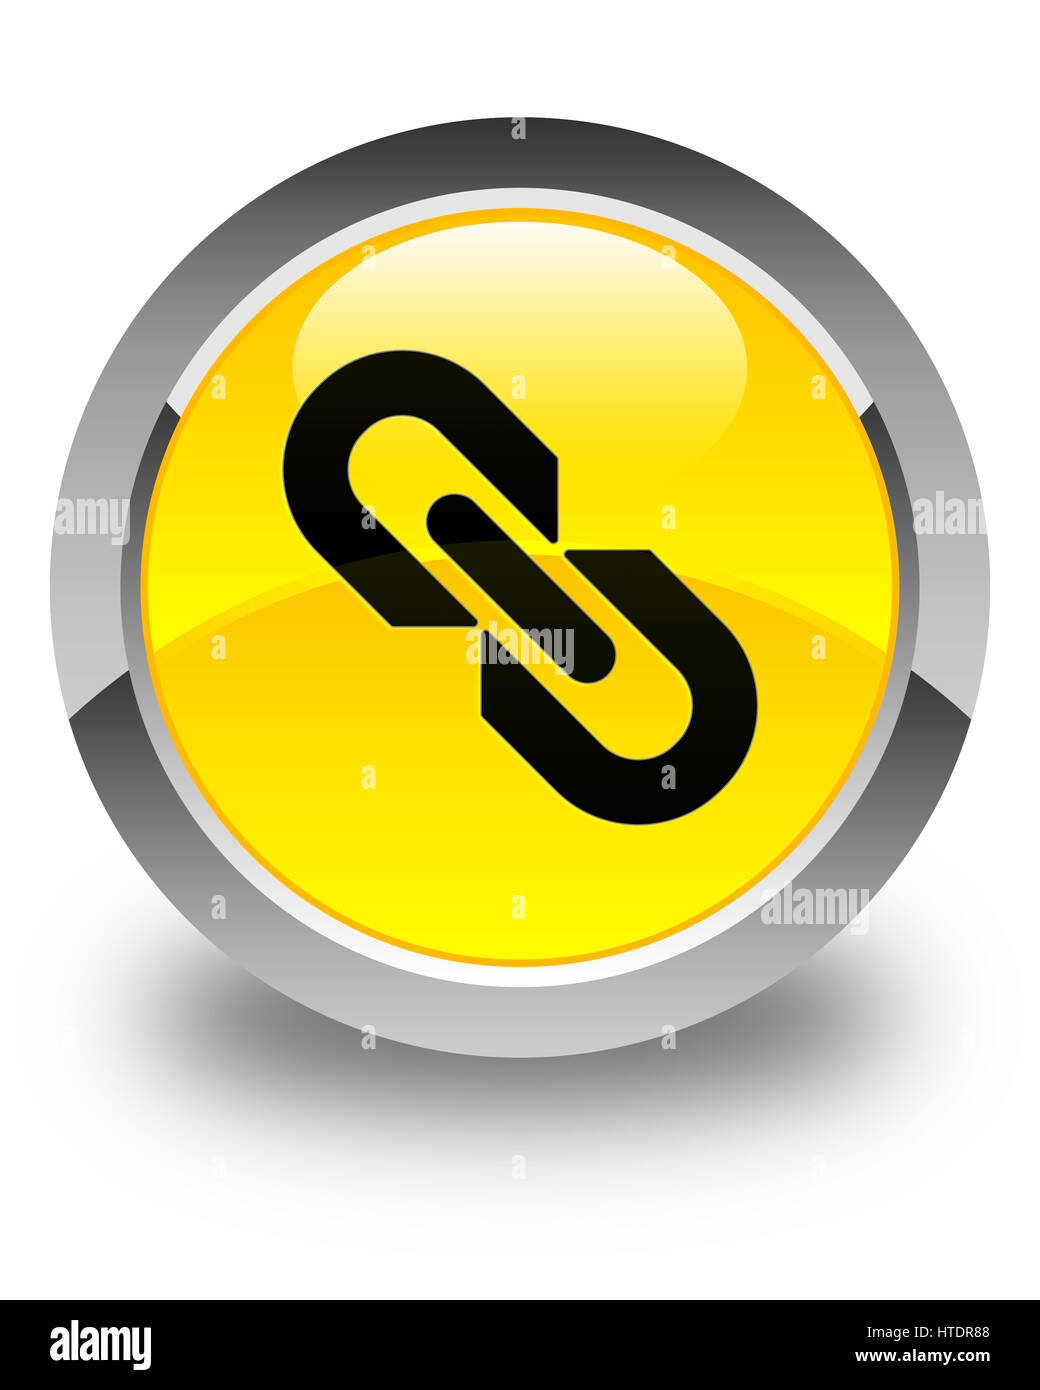 Link icon isolated on glossy yellow round button abstract illustration Stock Photo